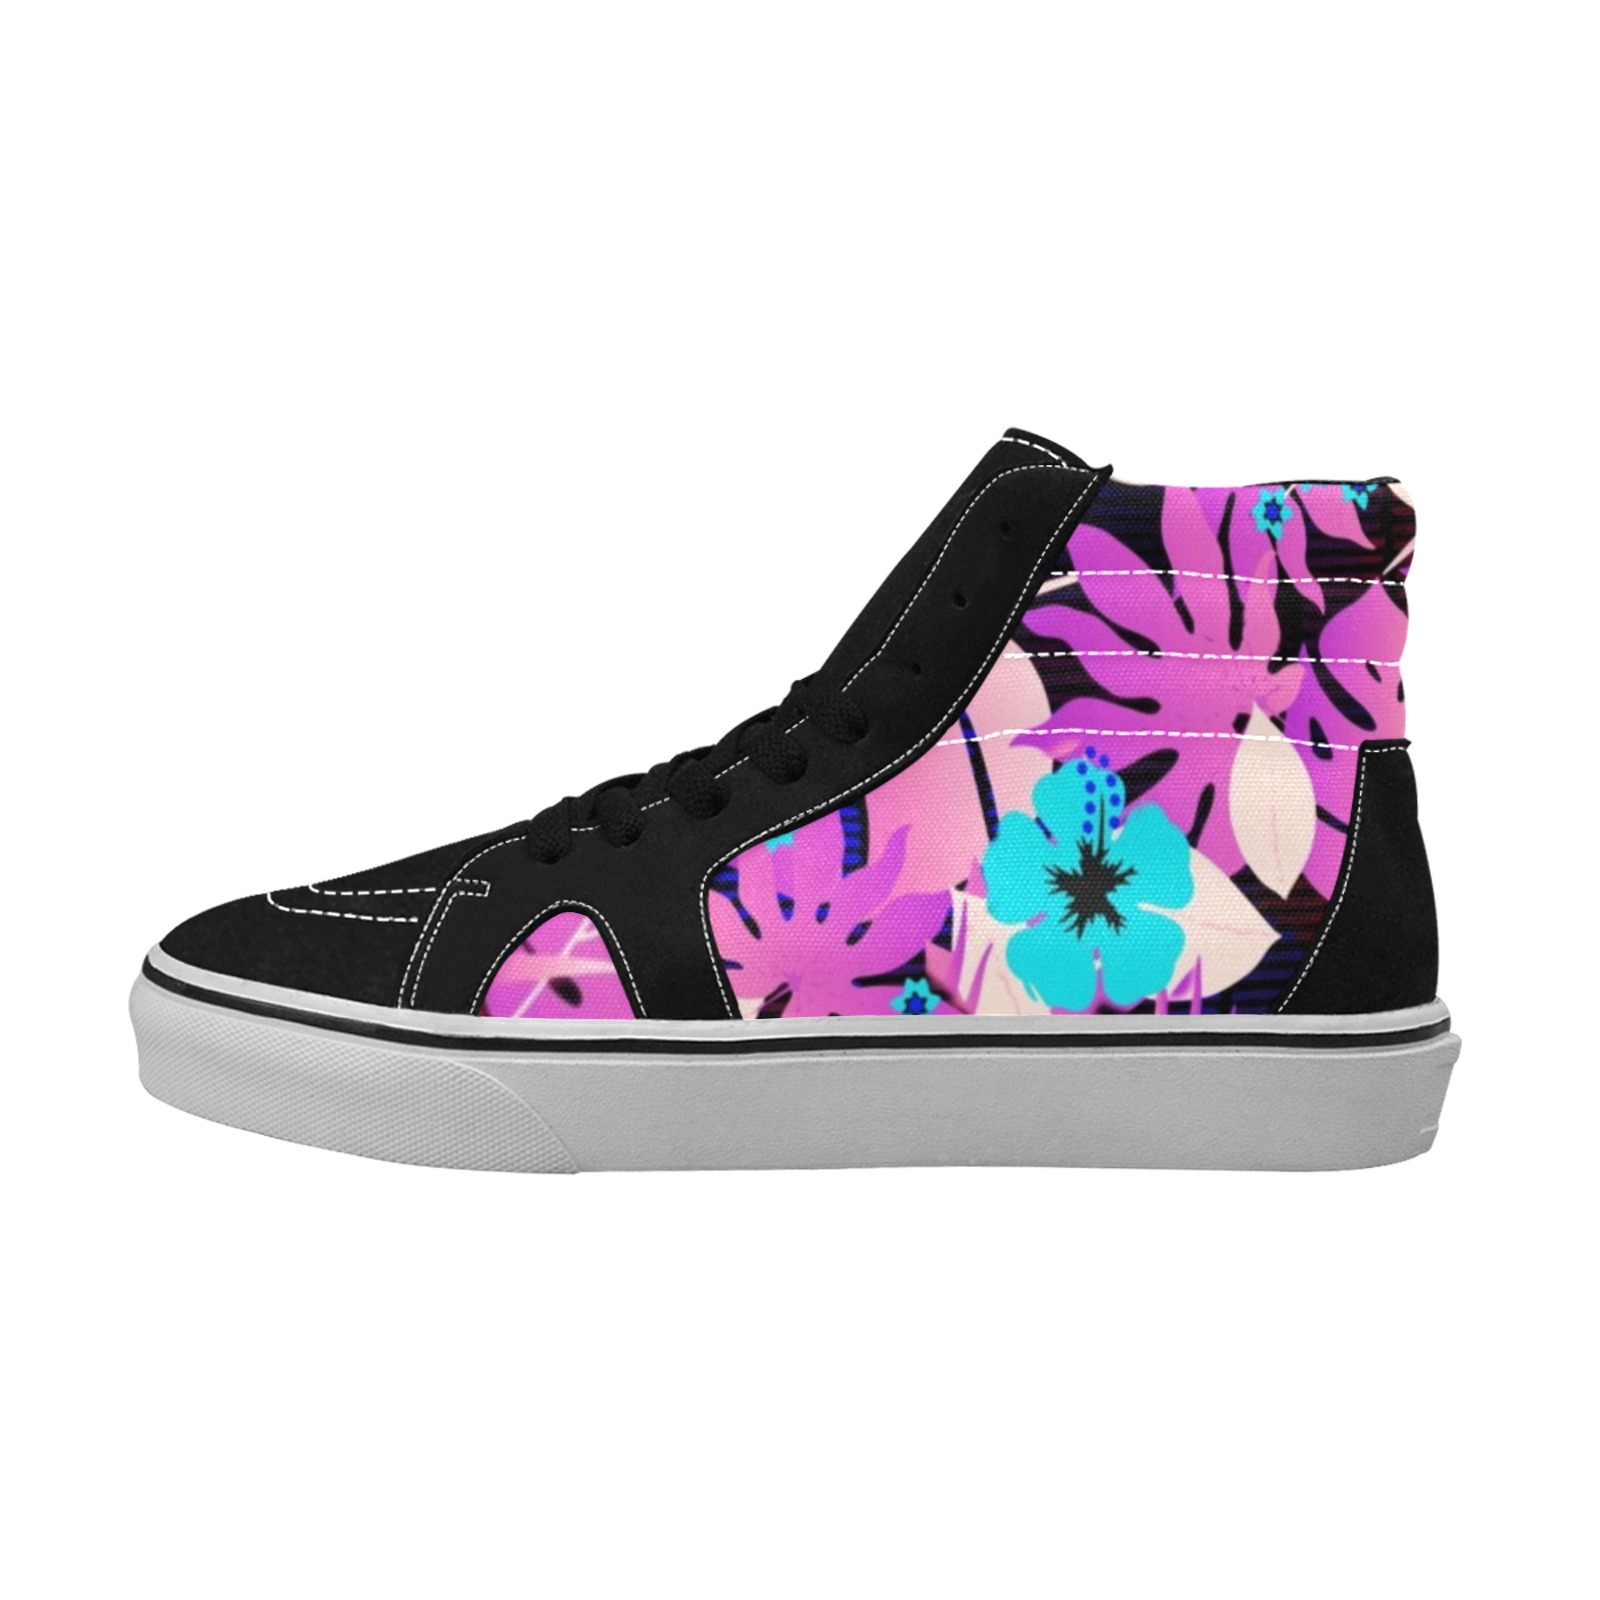 GROOVY FUNK THING FLORAL PURPLE Men's High Top Skateboarding Shoes (Model E001-1)